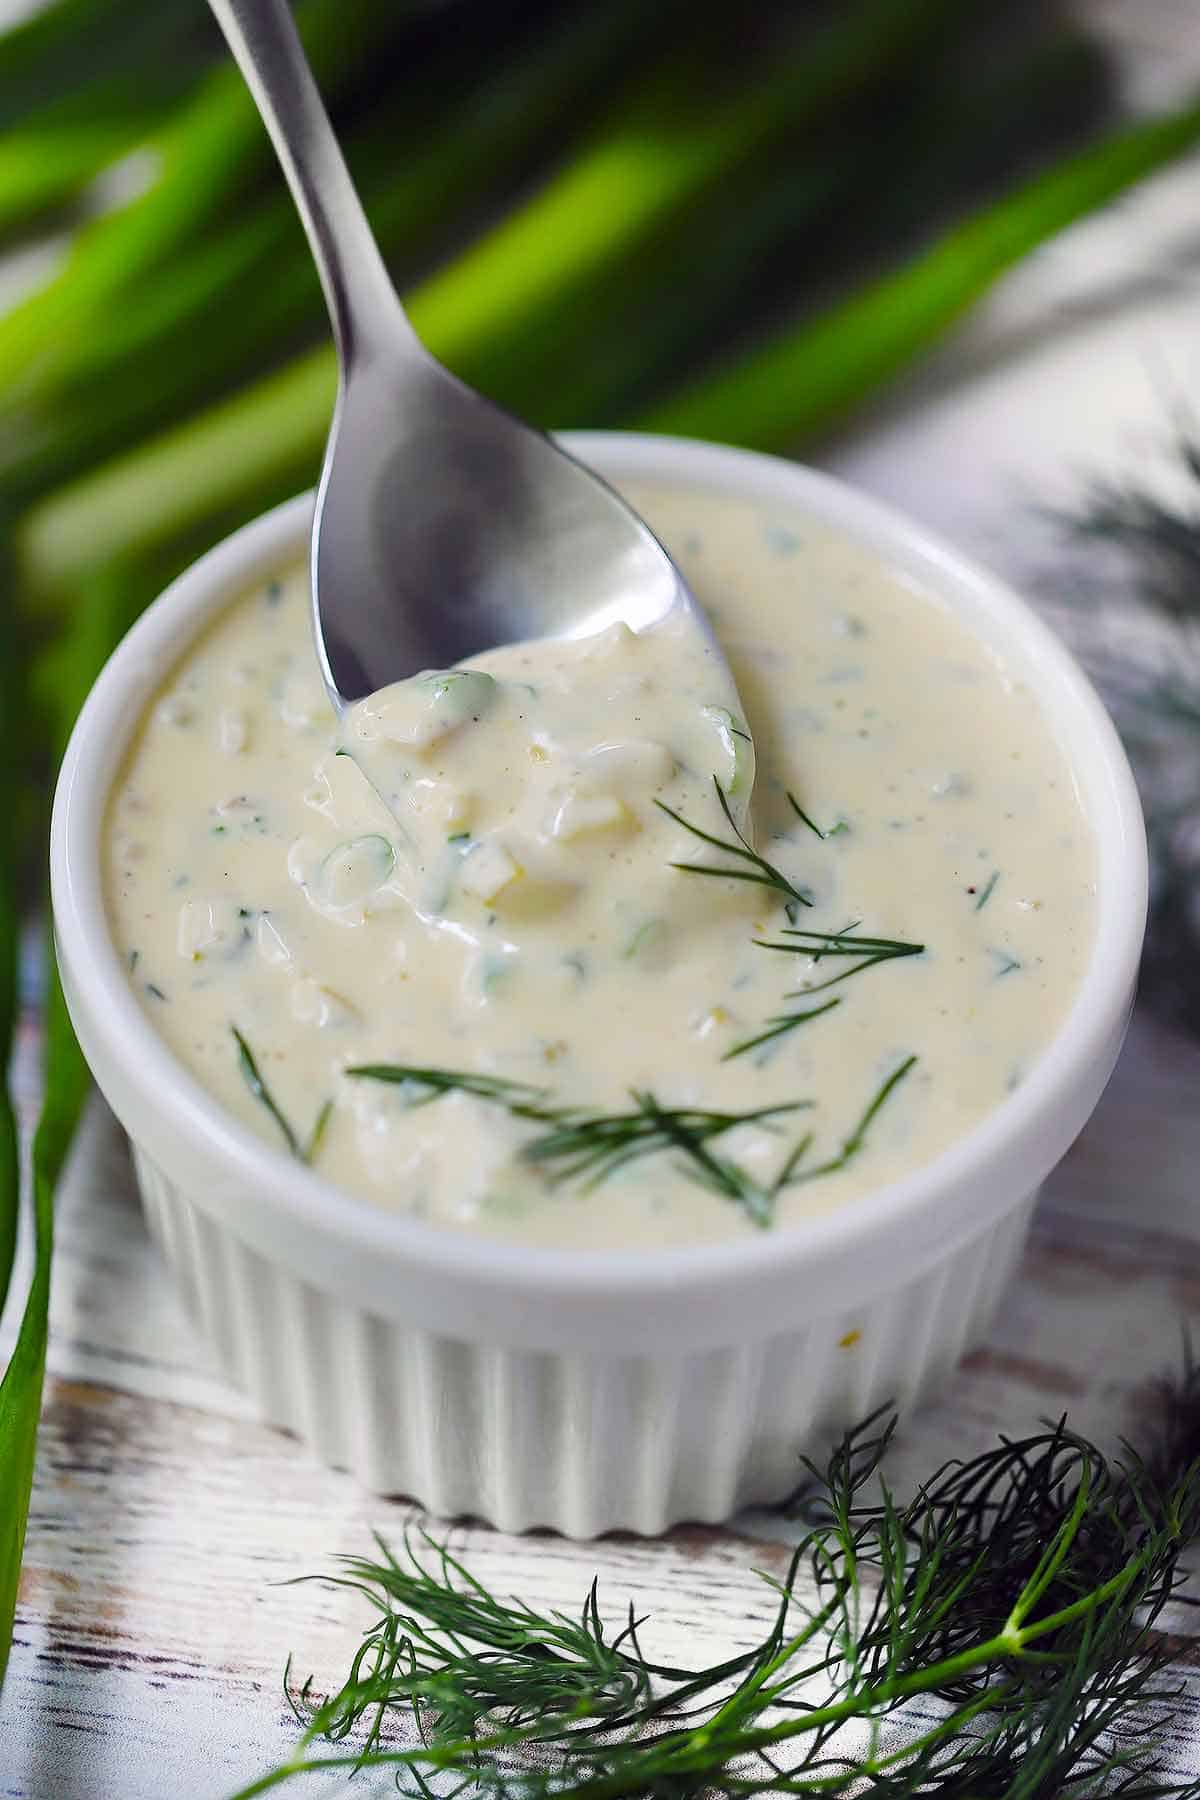 A white ramekin filled with homemade tartar sauce and a spoon scooping some out.